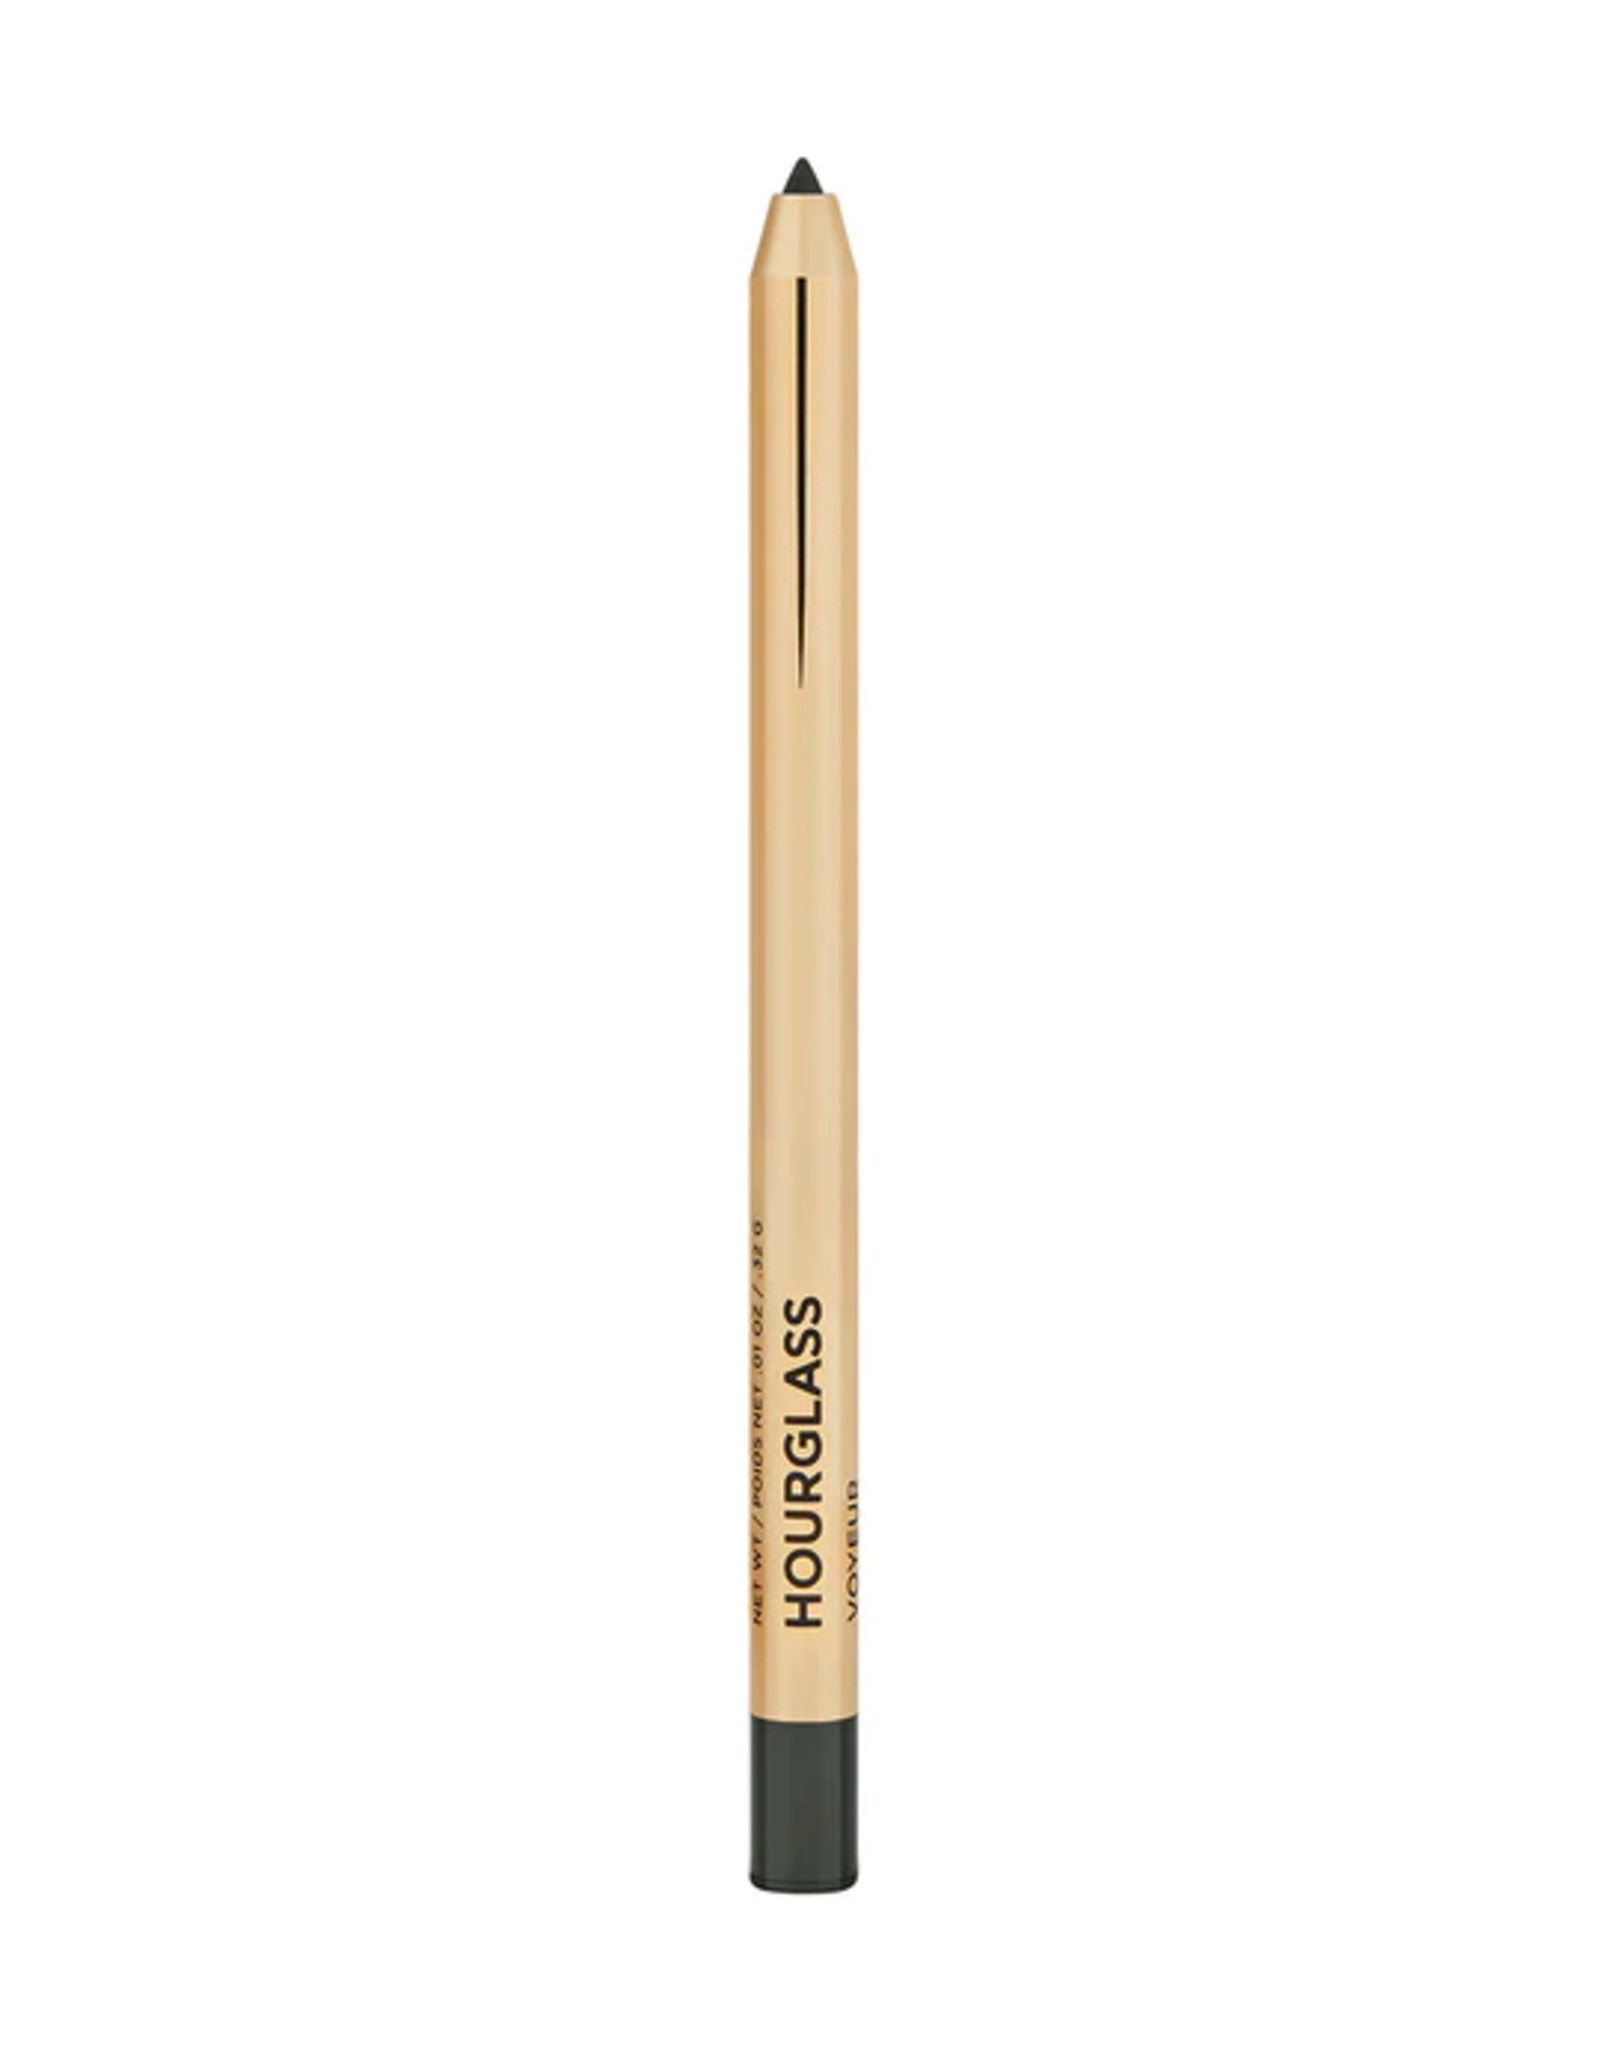 Hourglass Voyeur Waterproof Gel Eyeliner Color/Shade variant: Forest main image. This product is in the color green